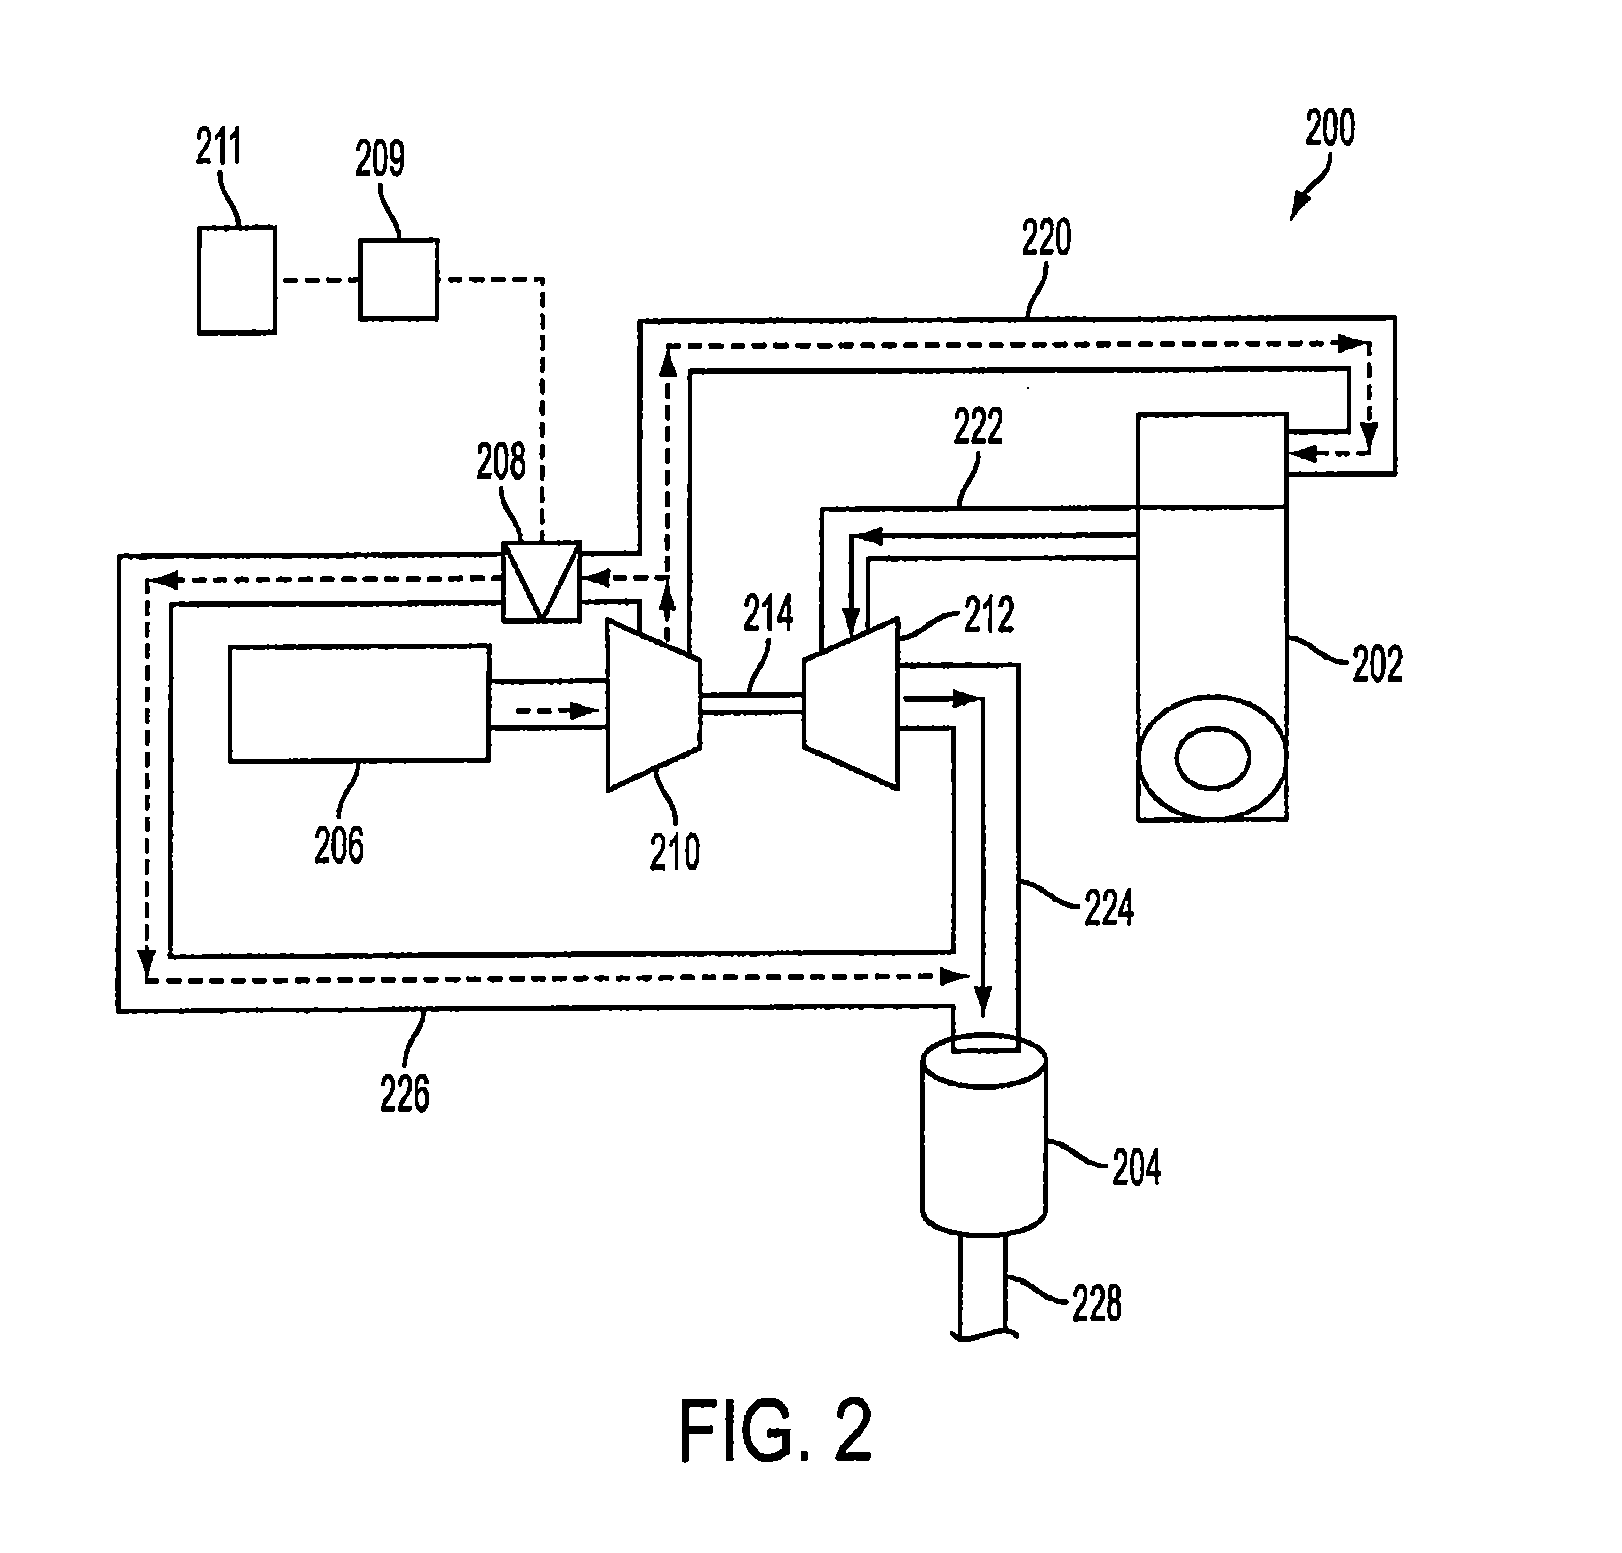 Boost extraction method of secondary air injection for internal combustion engine emission control